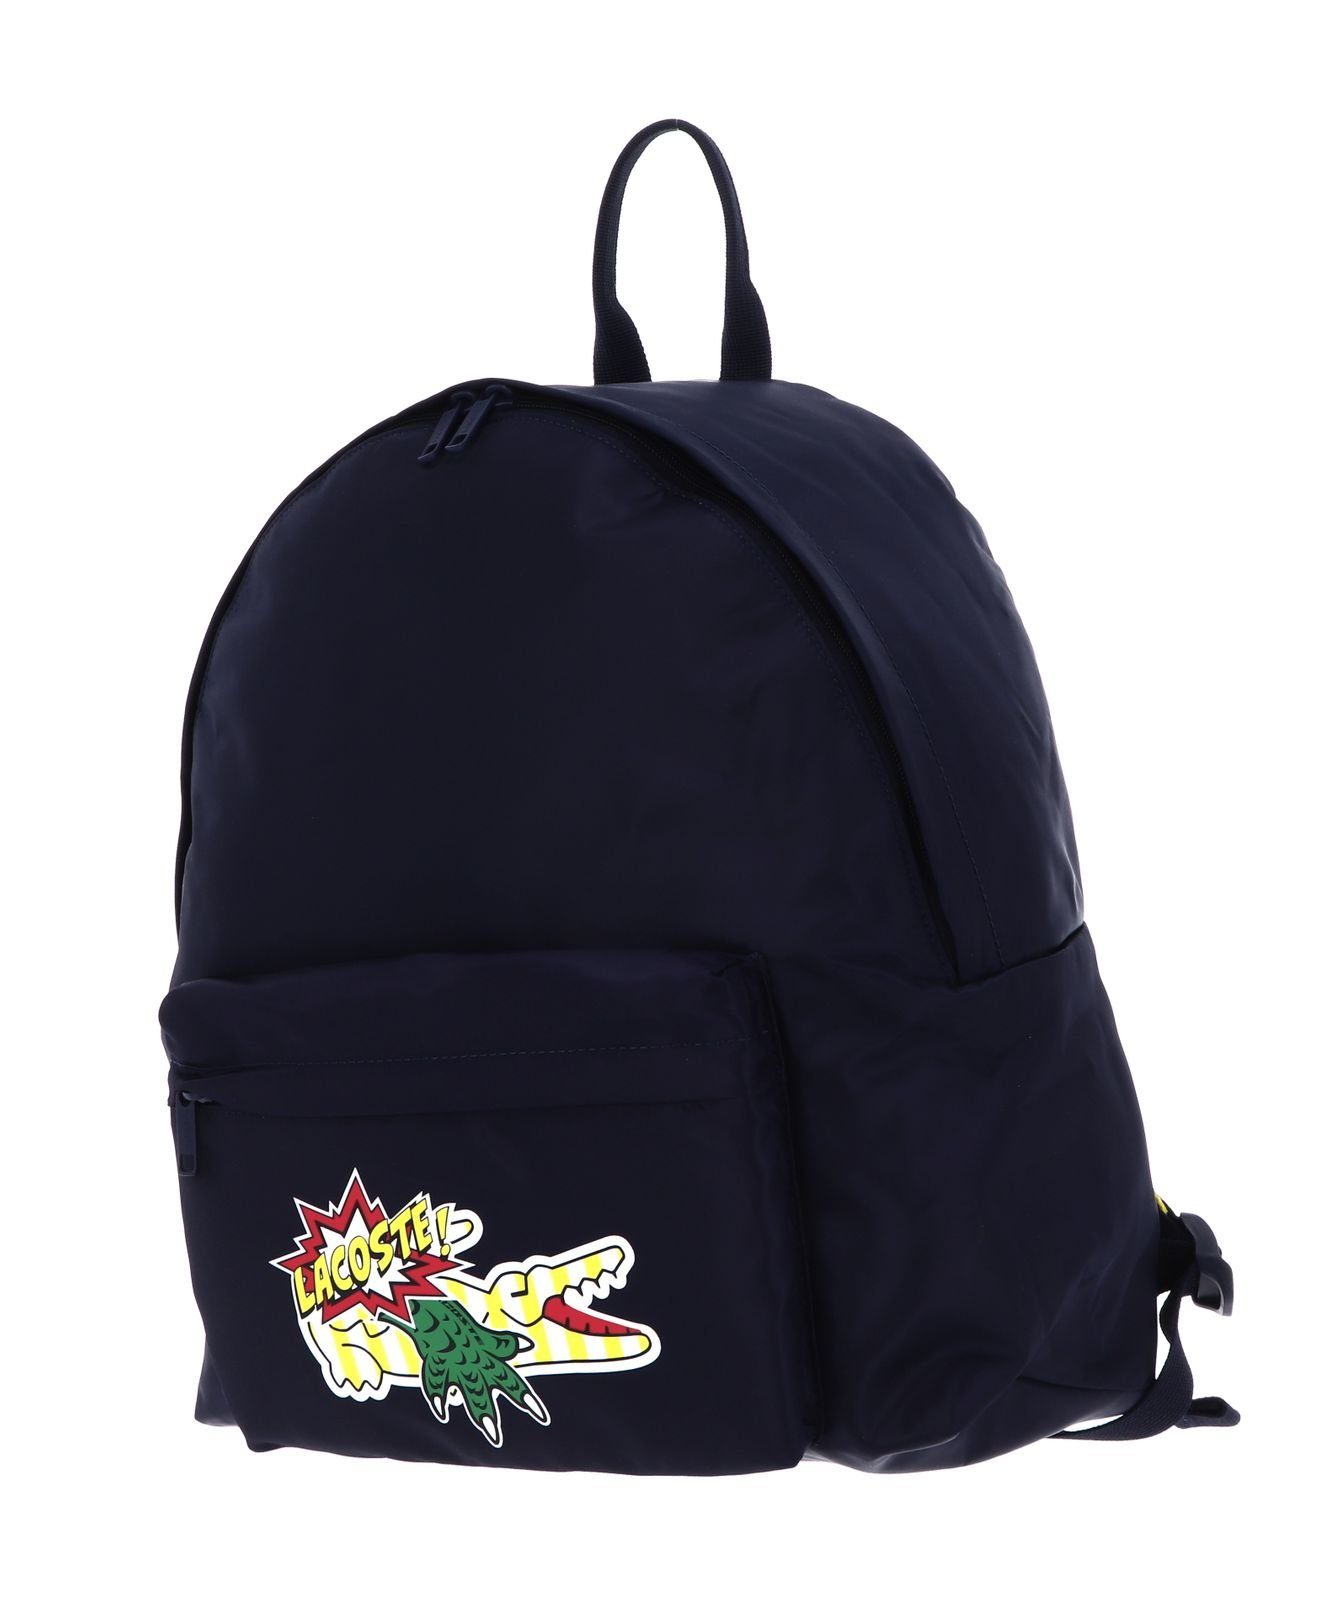 Lacoste Holiday Rucksack